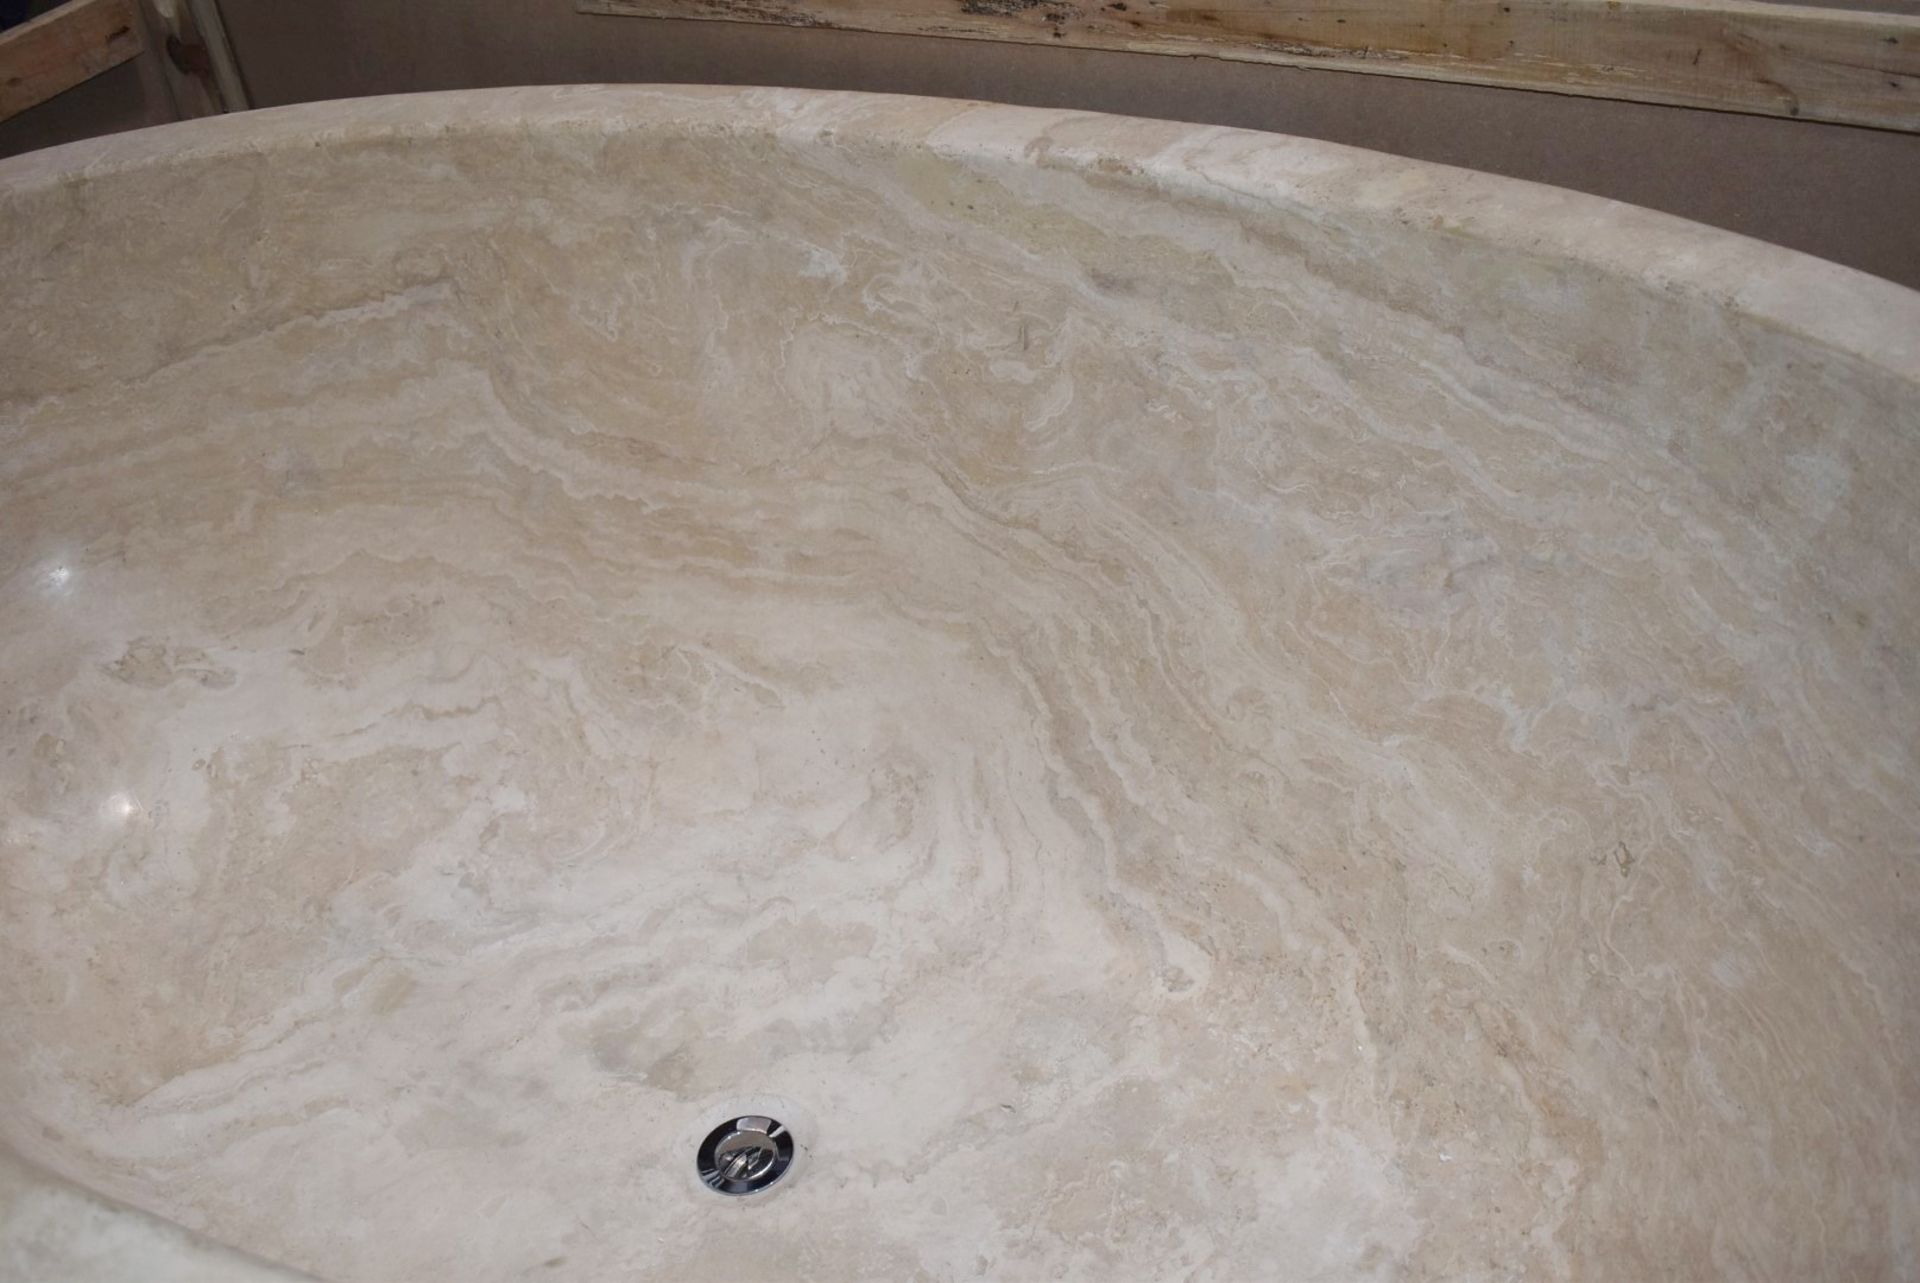 1 x Stonearth Luxury Grand Travertine Bath - Made From a Solid Piece of Stone - RRP £19,000 - New! - Image 19 of 25